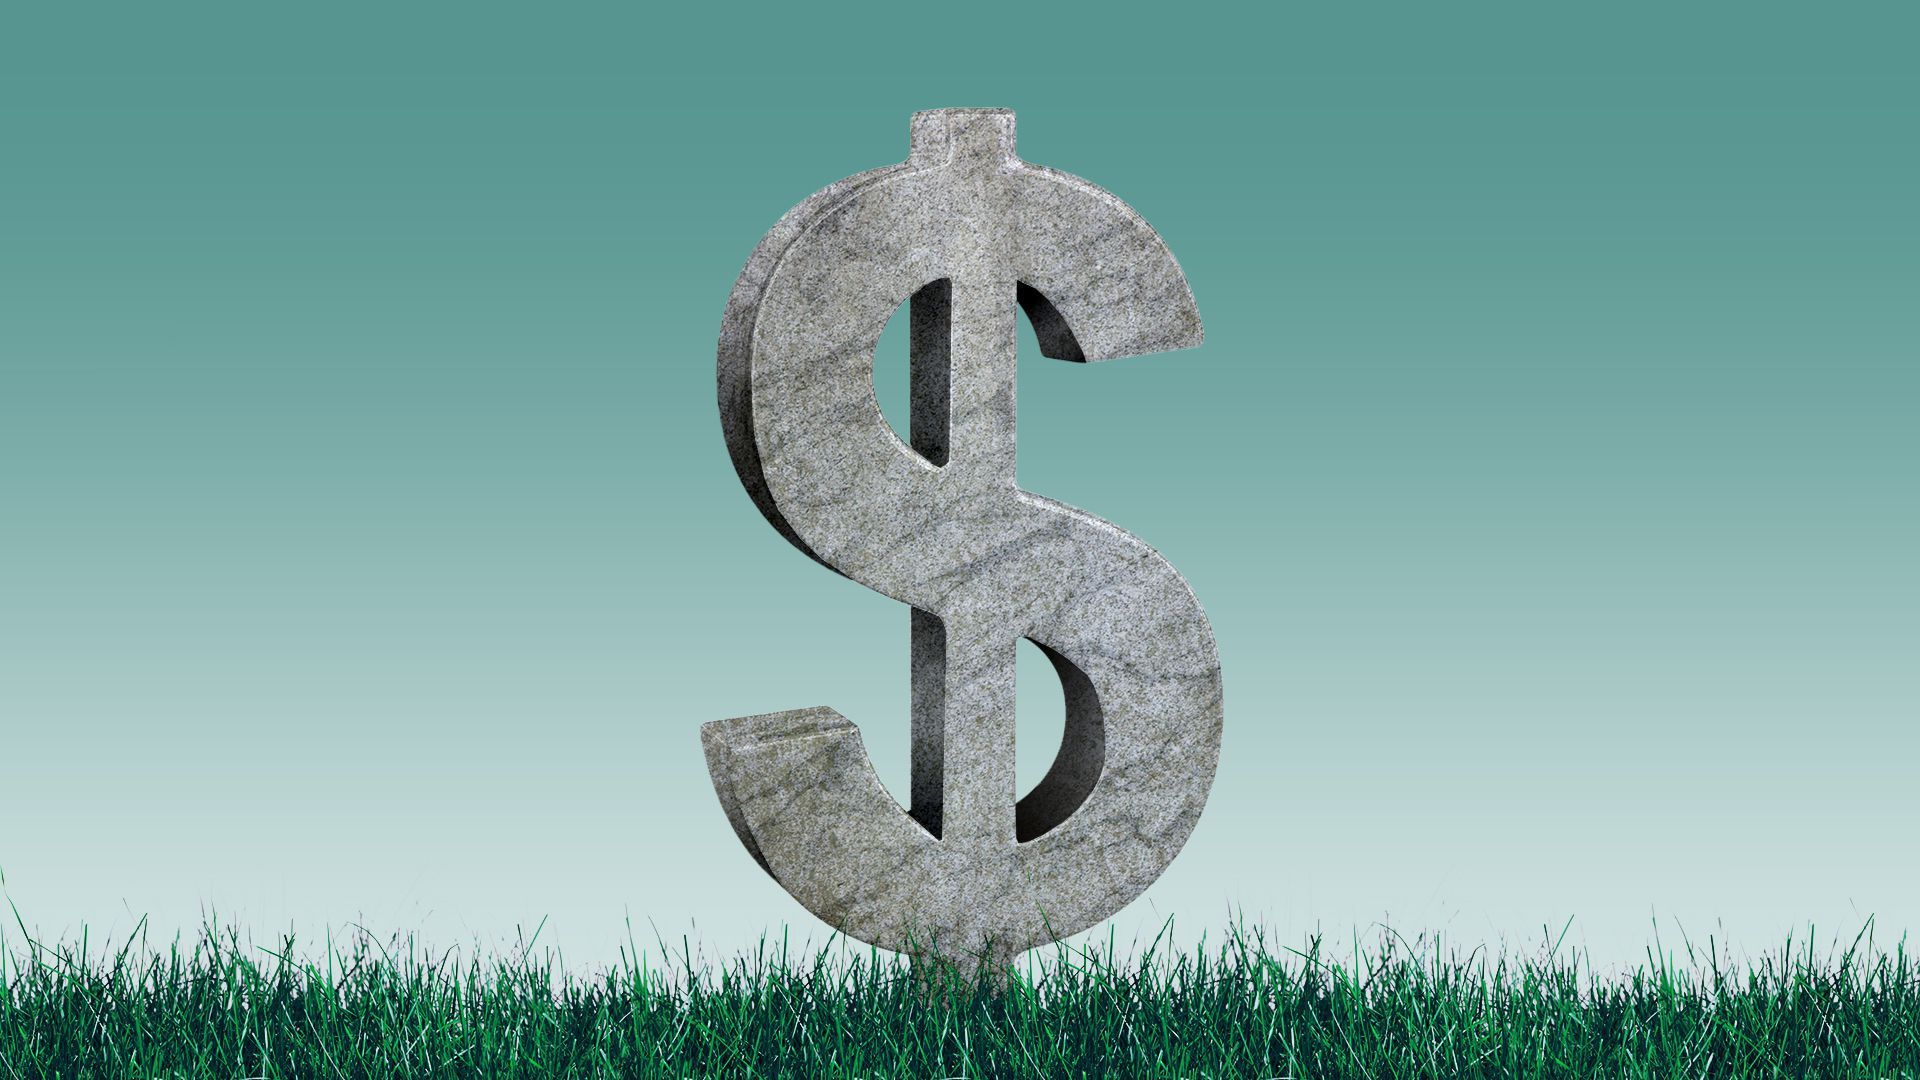 Illustration of a dollar sign growing in grass 